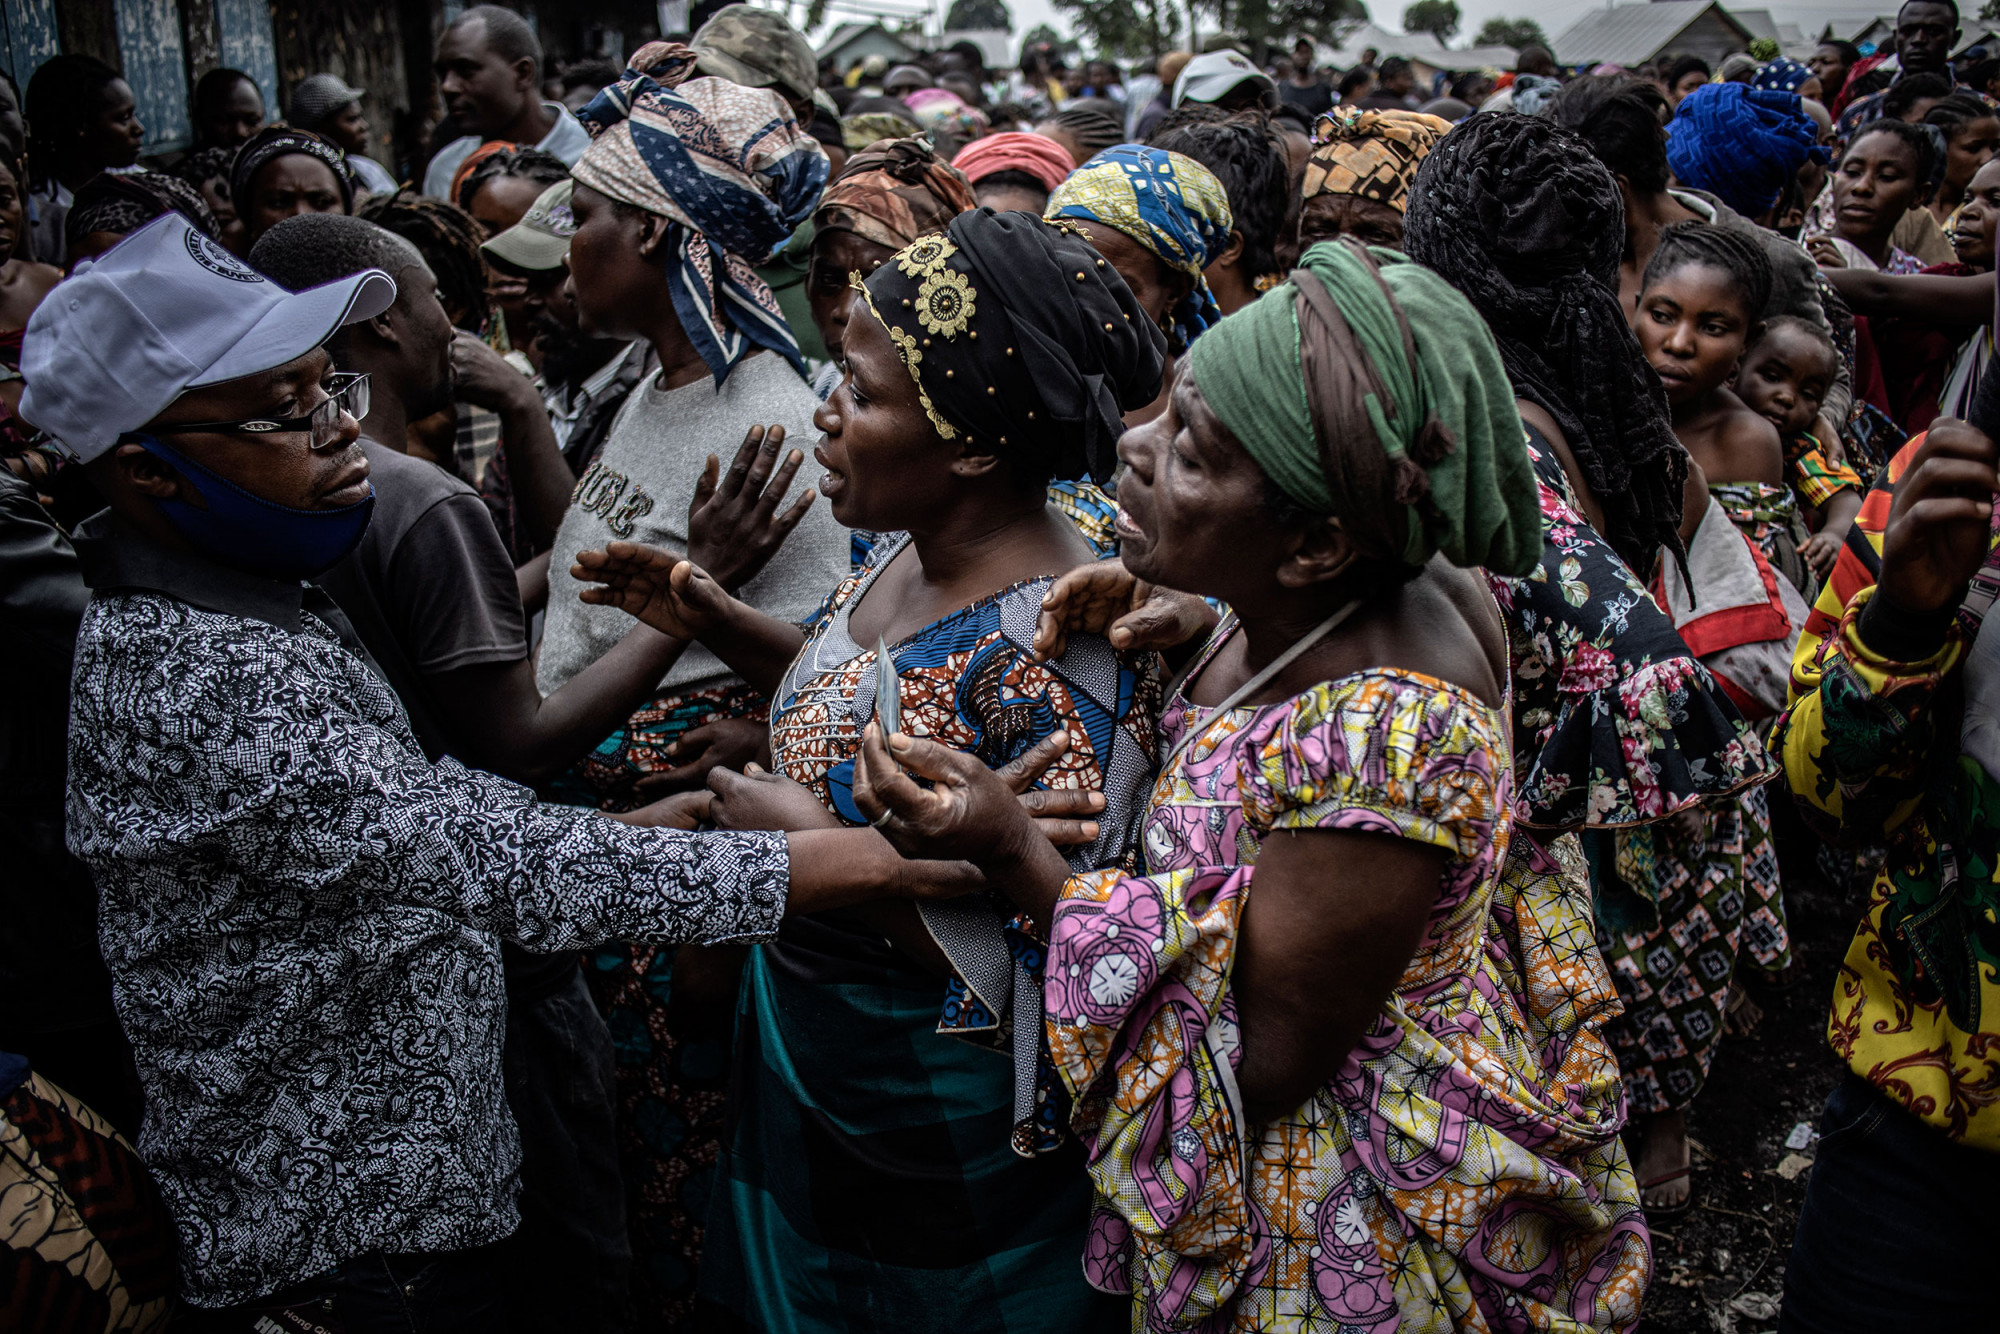 North Kivu, May 2021. People displaced by the eruption gather for the distribution of aid in Munigi on the northern outskirts of Goma. © Finbarr O’Reilly for Fondation Carmignac